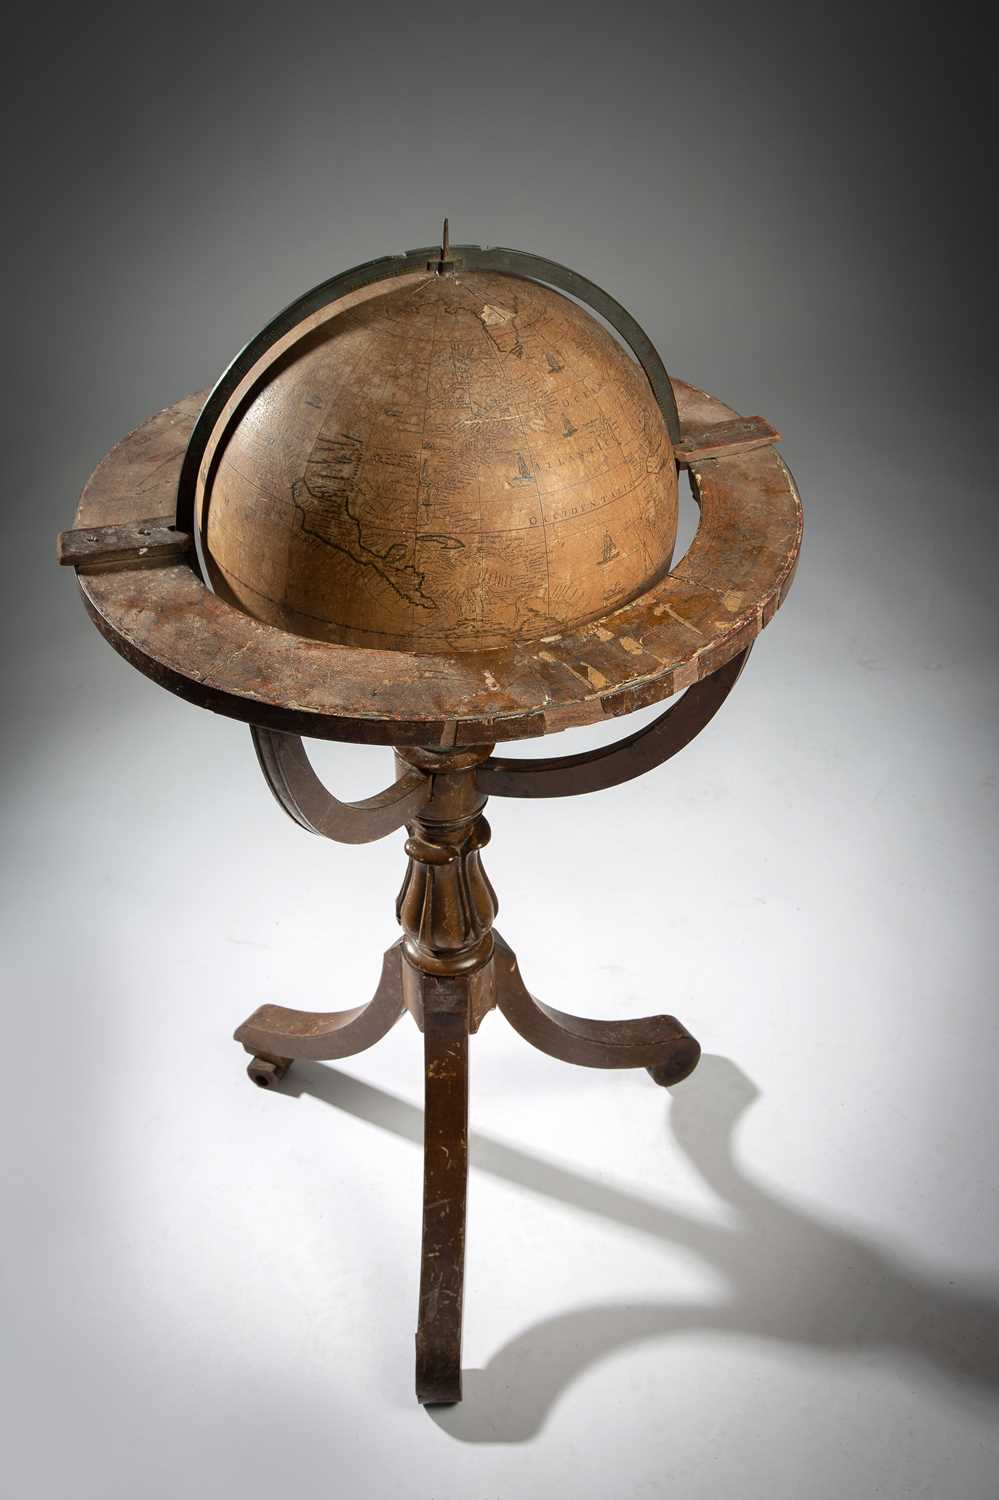 A RARE CHARLES II 14 INCH TERRESTRIAL GLOBE BY ROBERT MORDEN, WILLIAM BERRY AND PHILIP LEA,